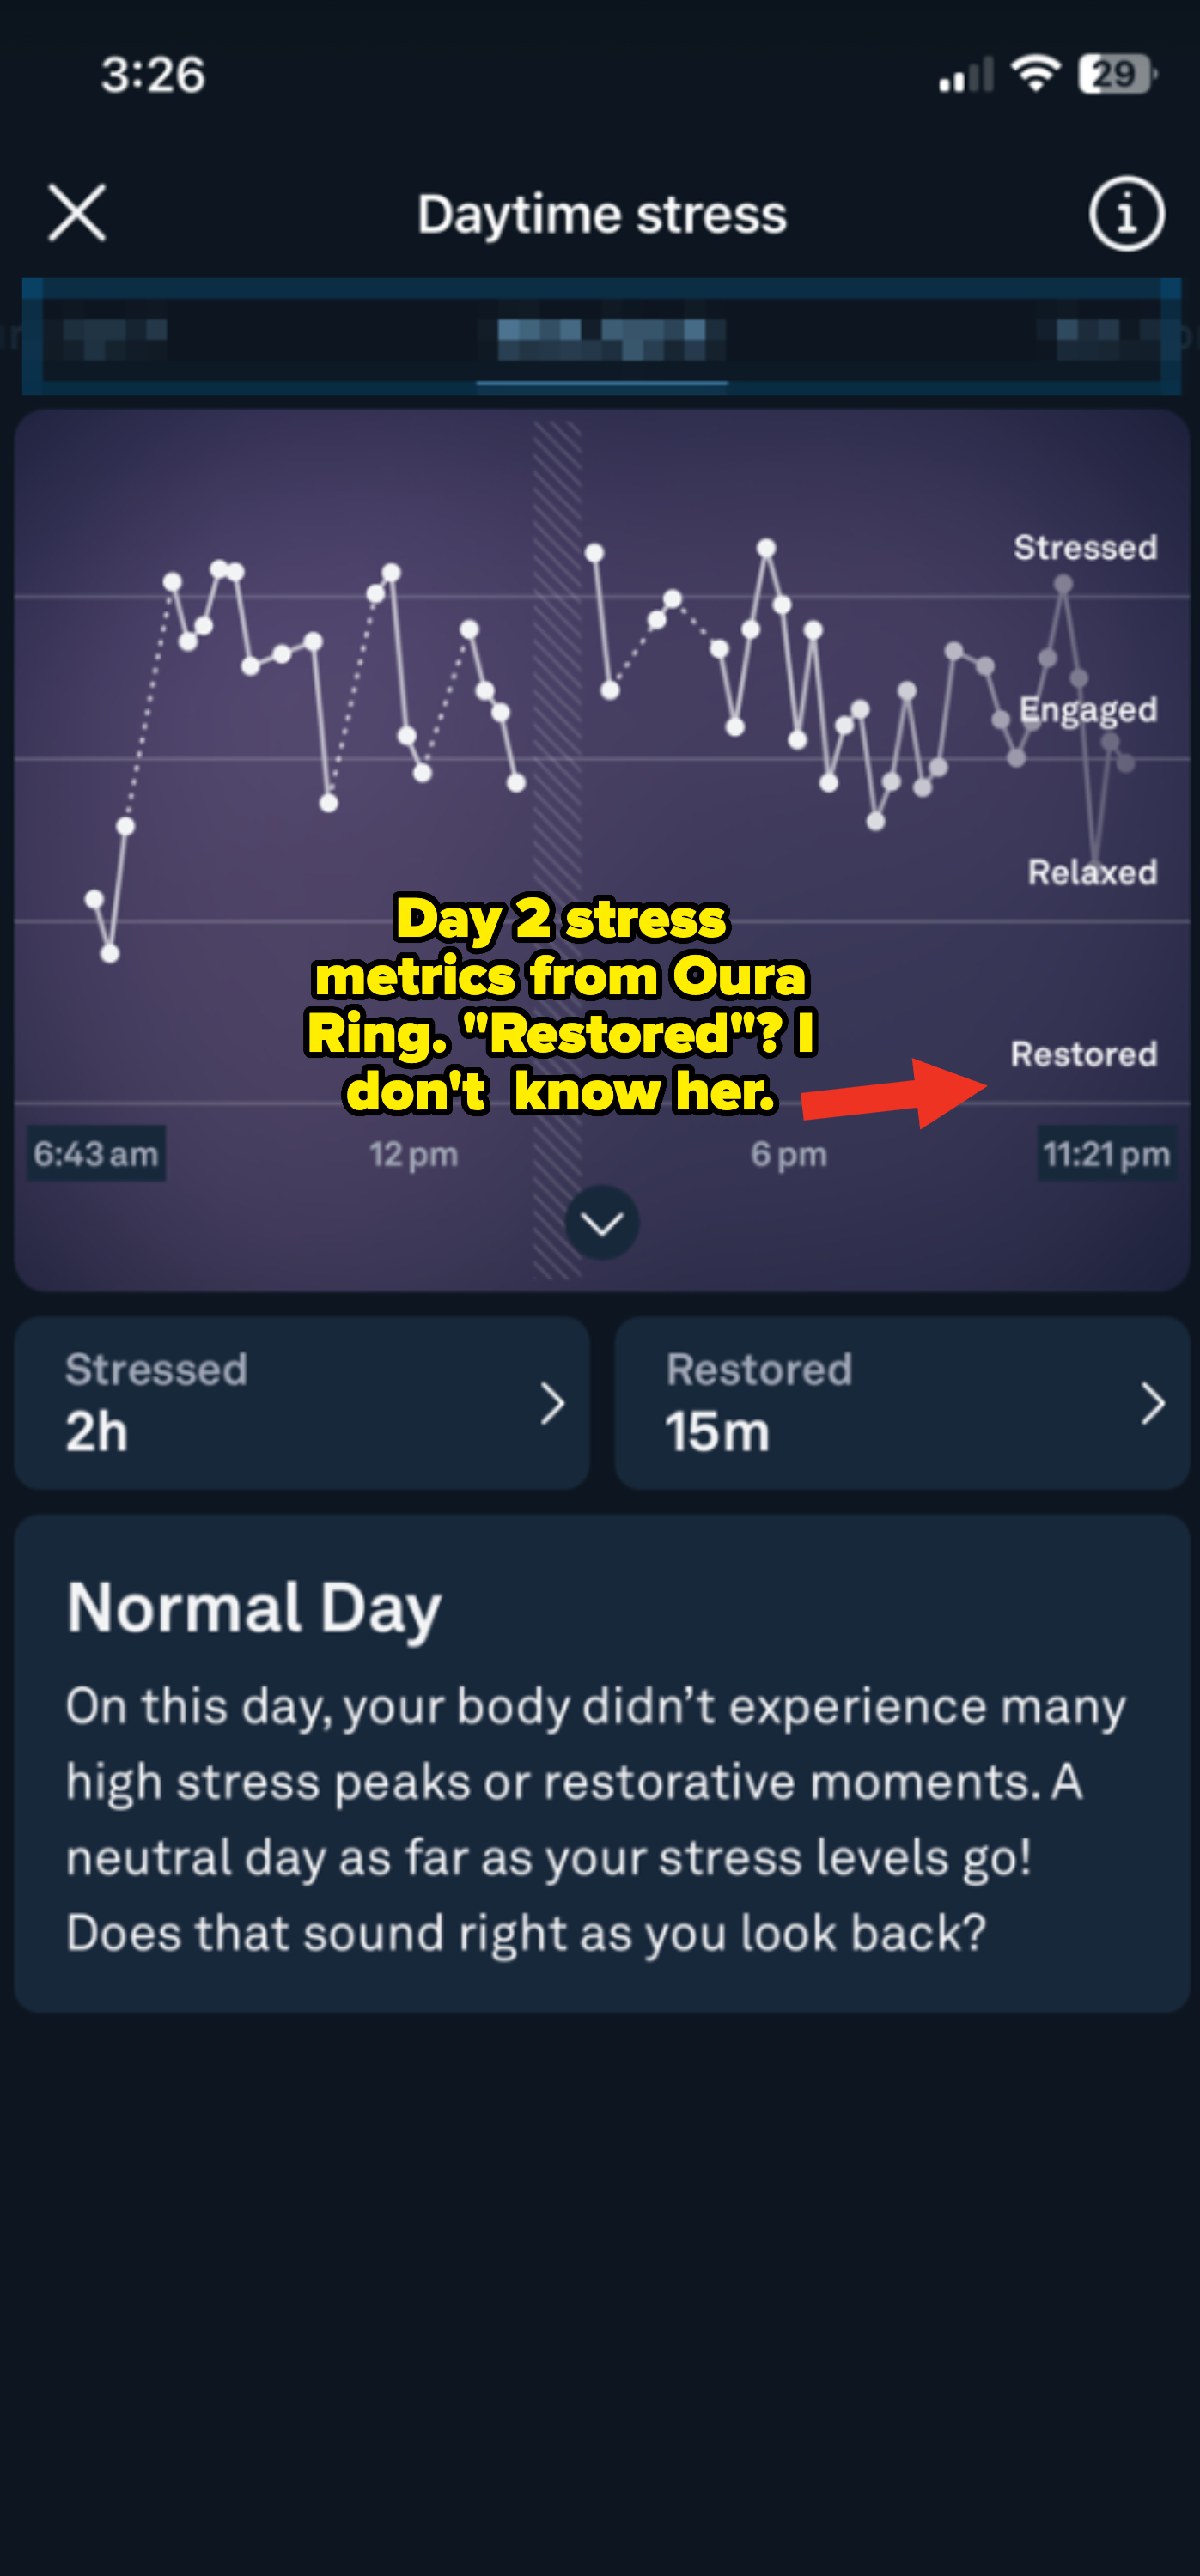 A mobile app screen shows a graph of daytime stress for Monday, April 8, with a summary stating 2 hours of stress and 15 minutes of rest, classifying it as a normal day